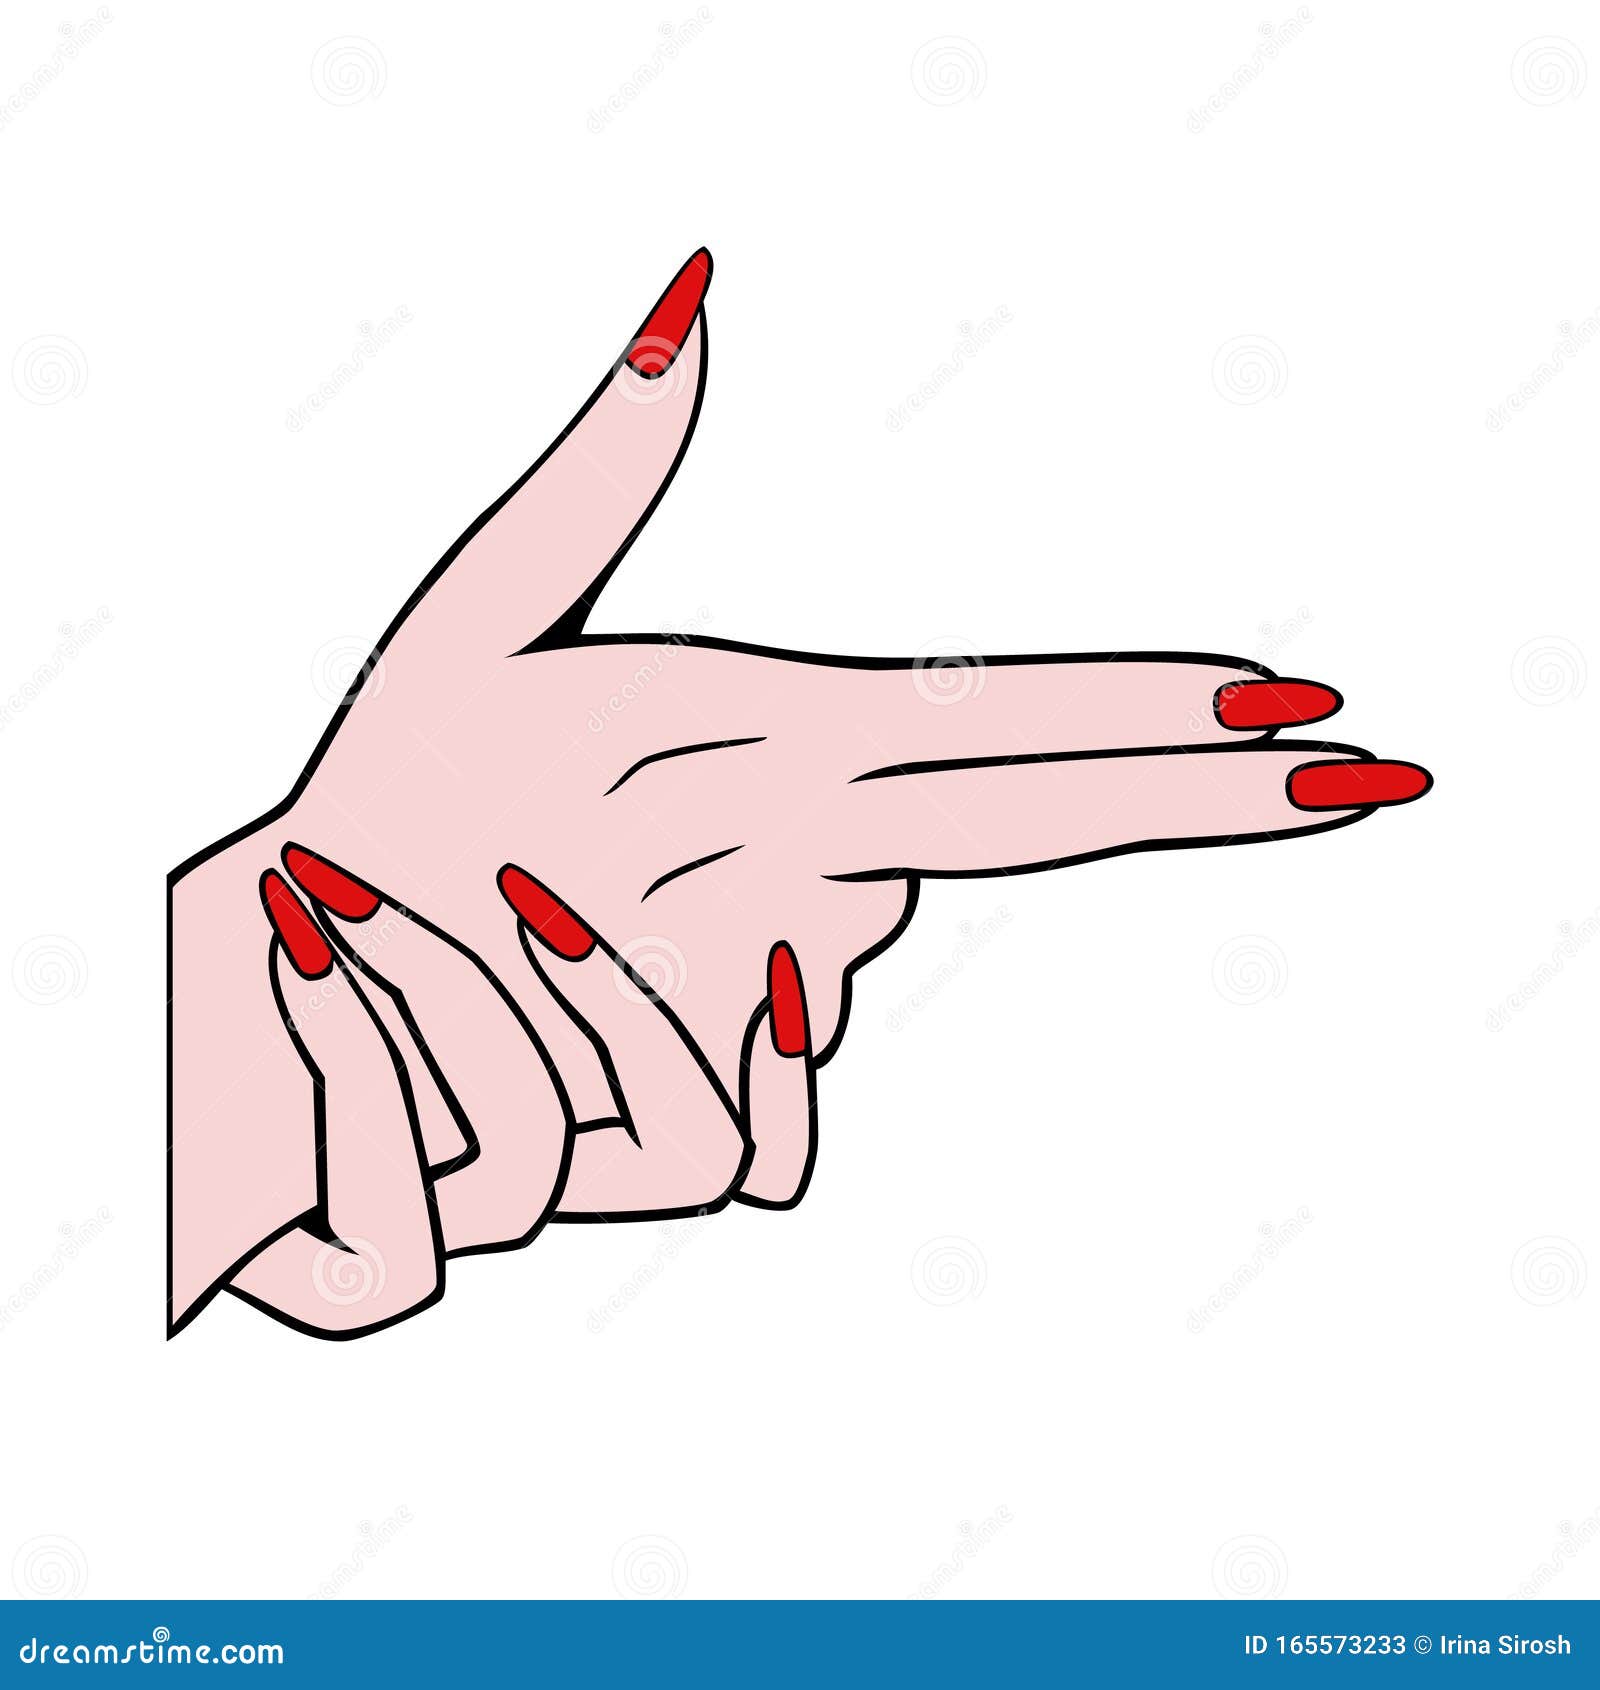 girl holds hands like a gun icon,   in sketch style . making aggression signal by